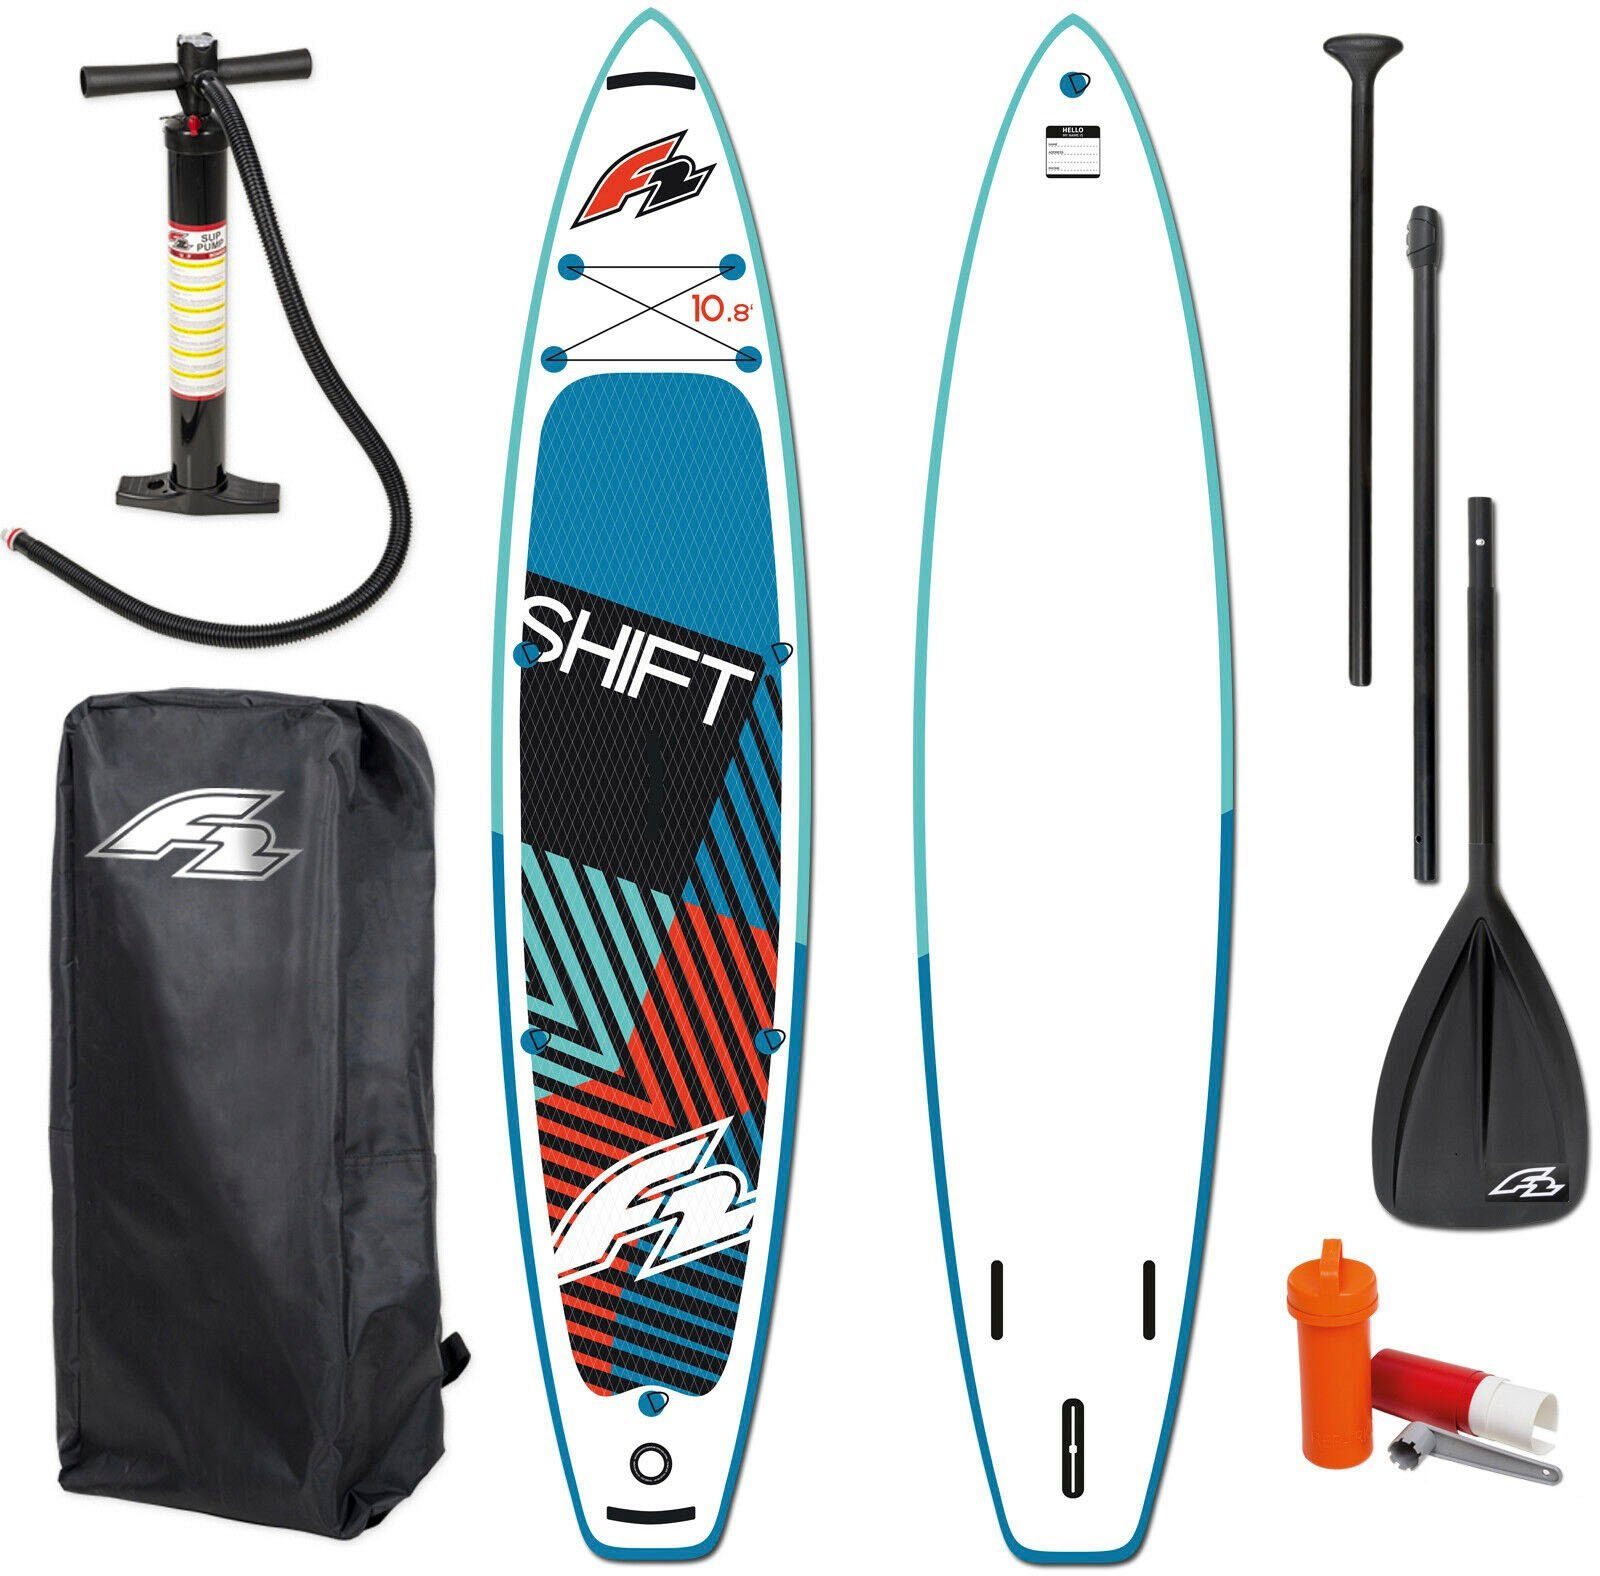 F2 Inflatable SUP-Board Shift 10,8, (Packung, 5 tlg) | SUP-Boards